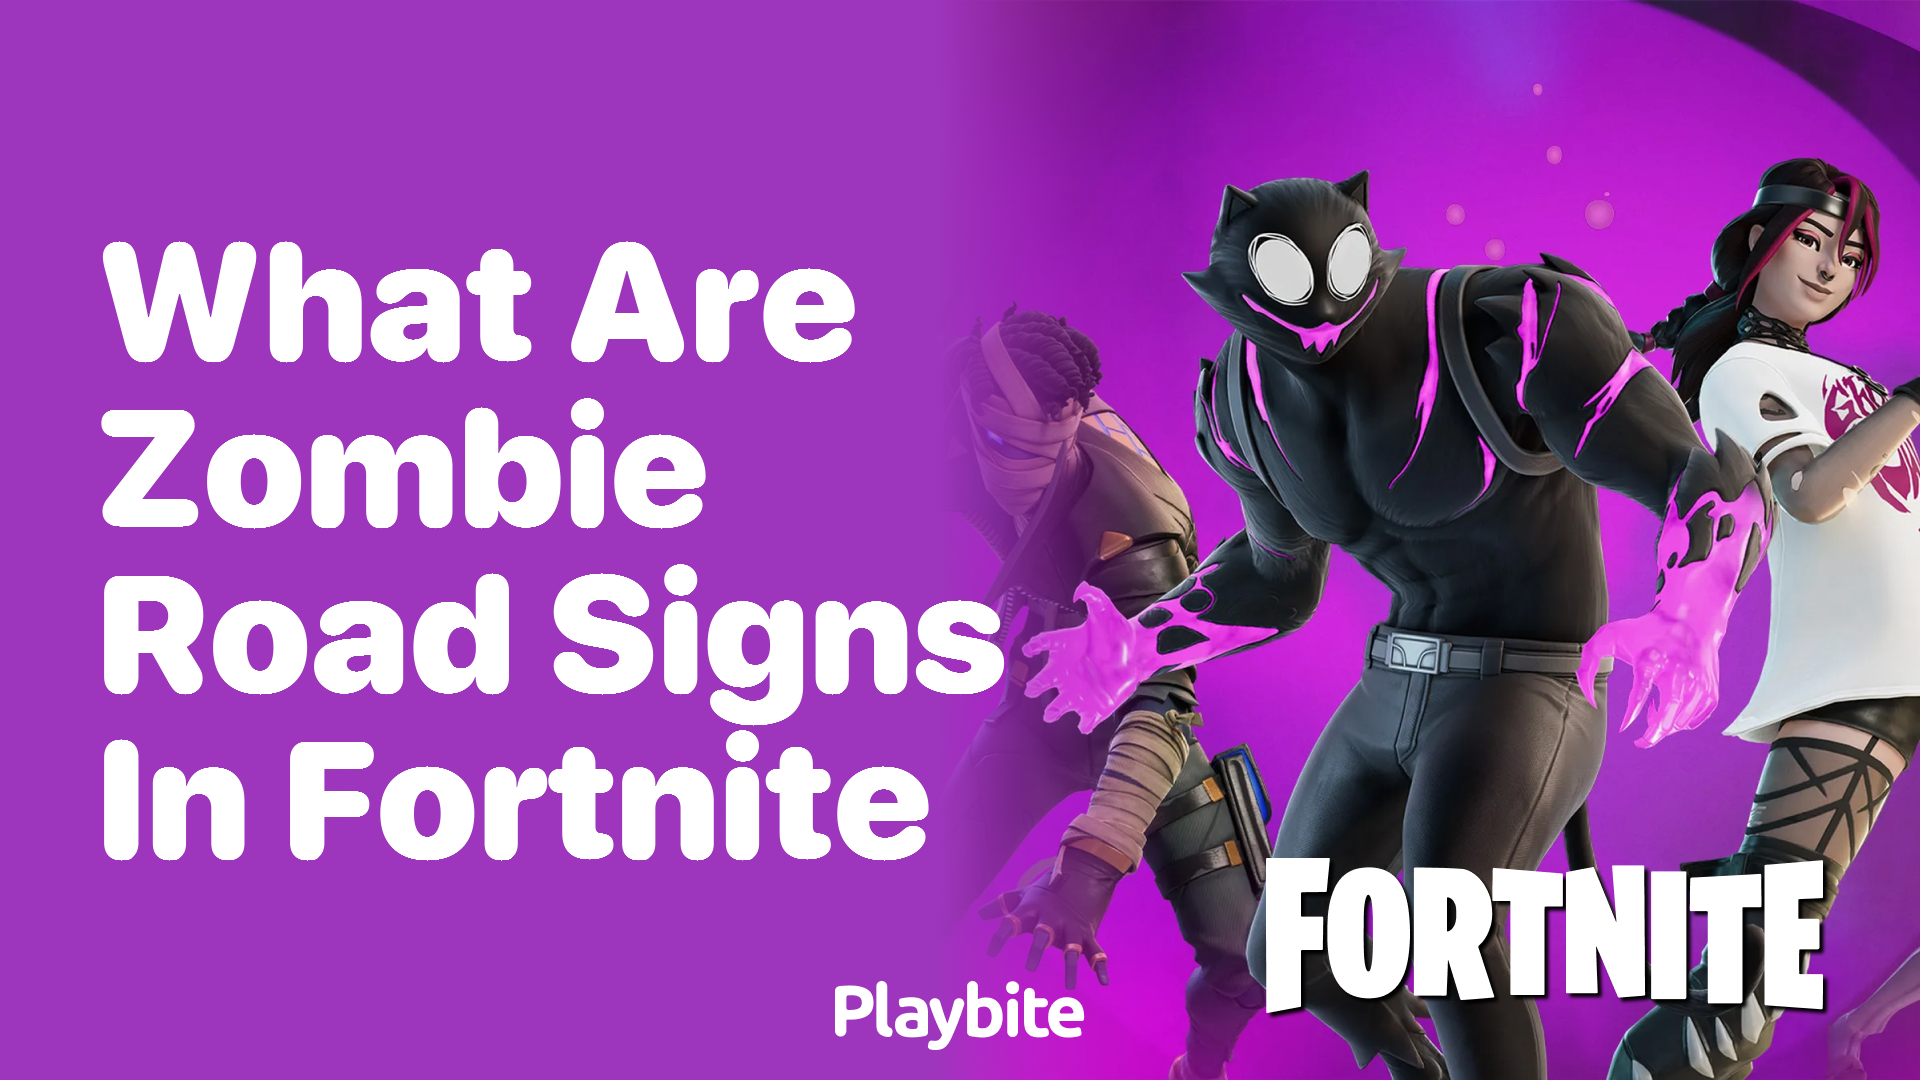 What Are Zombie Road Signs in Fortnite?